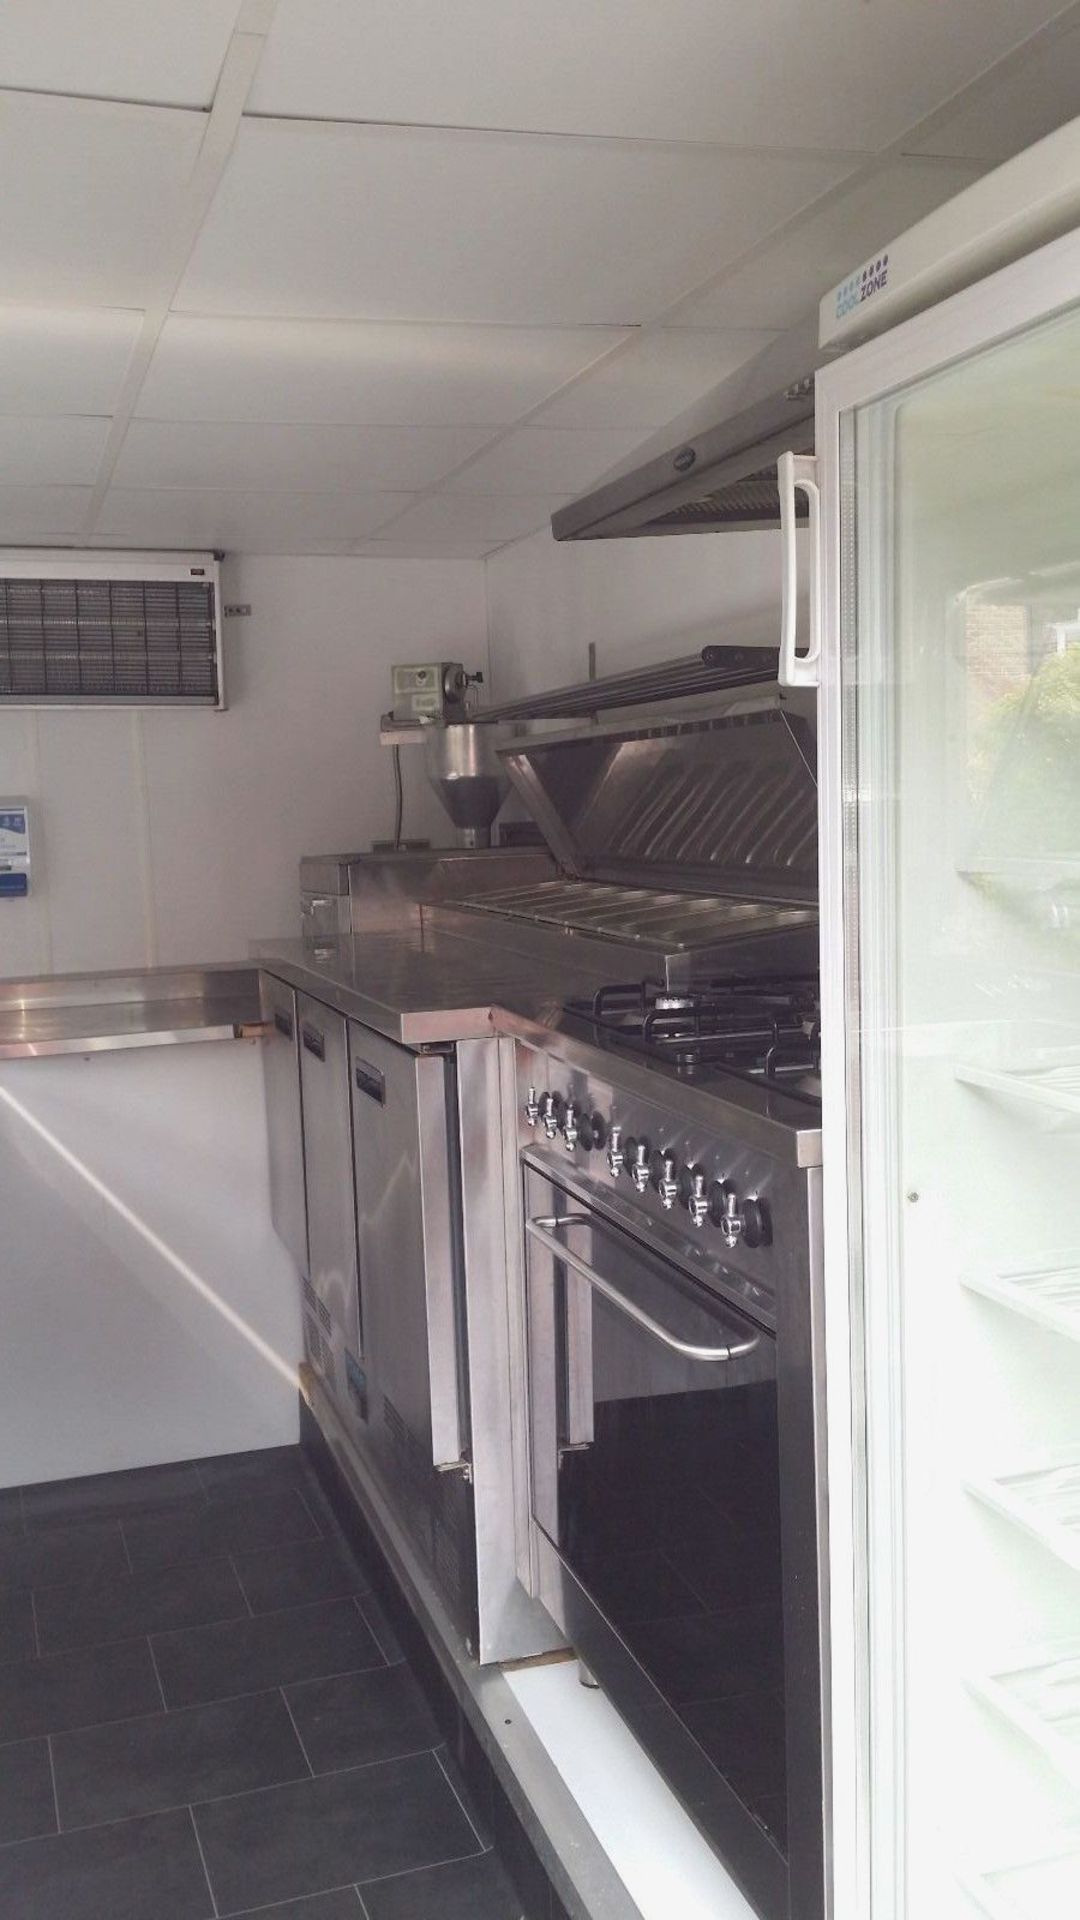 5 Star Rated A Pro Catering Unit Indespension Trailer - Image 5 of 7